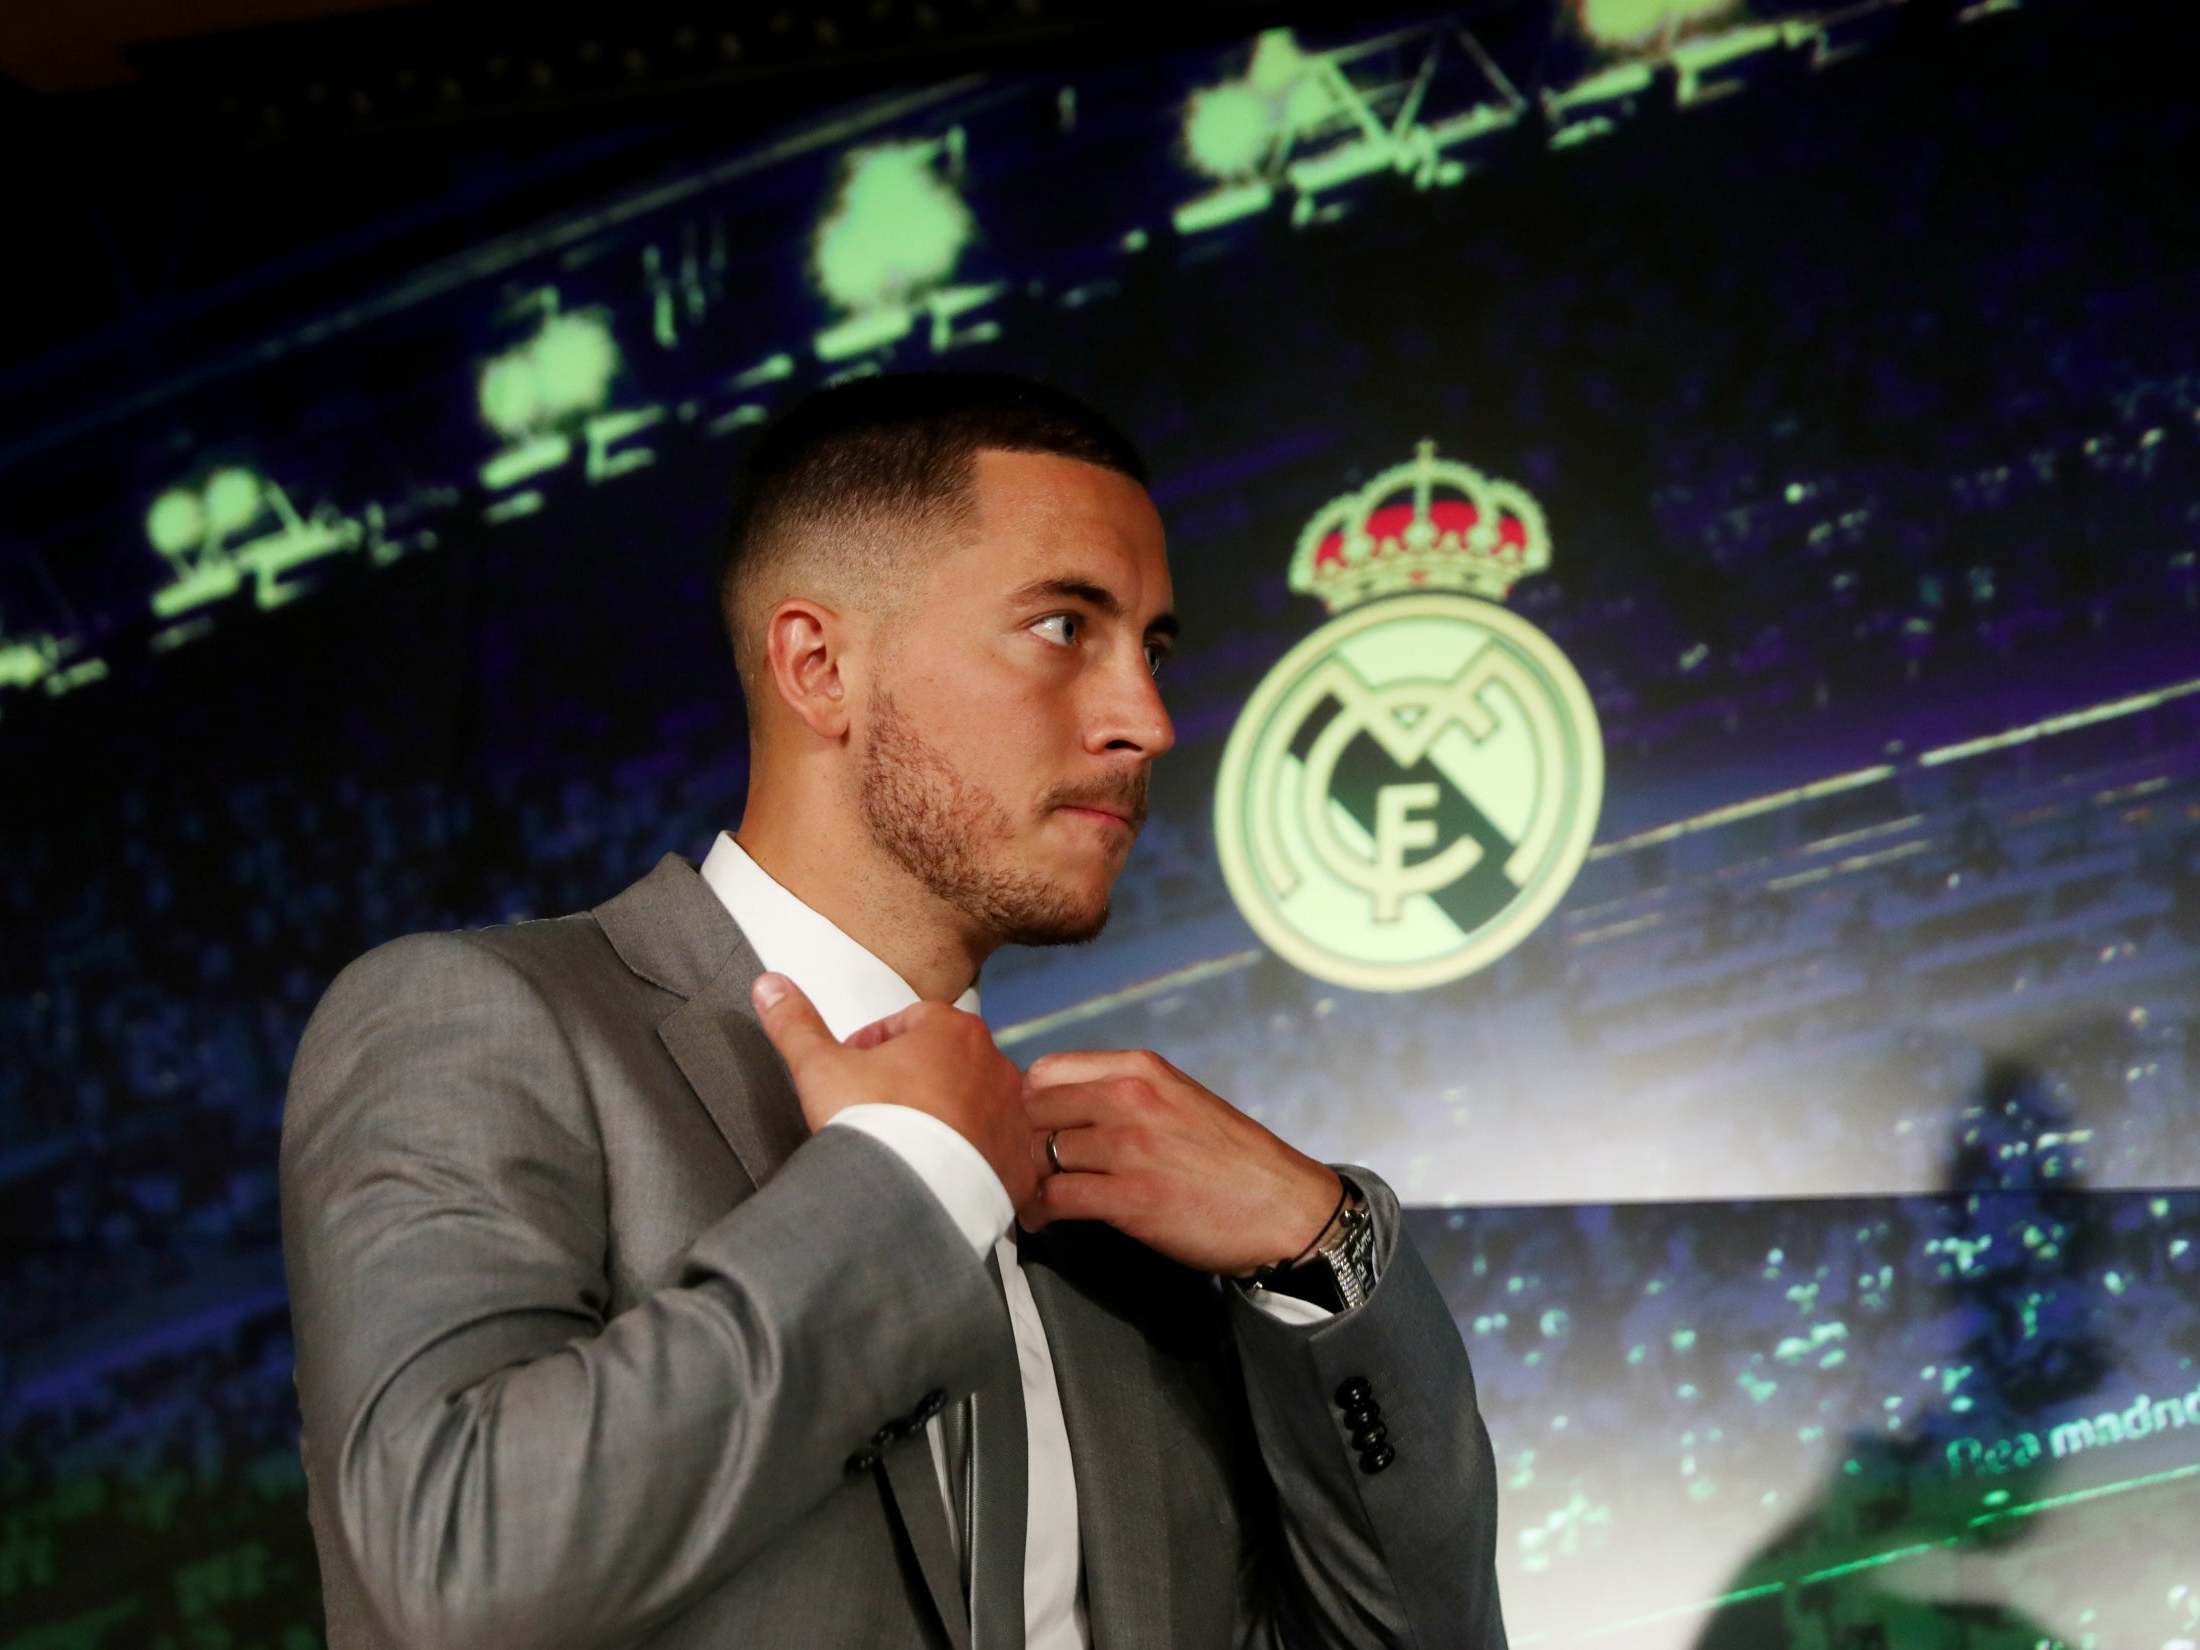 Eden Hazard reveals secret chat with Real Madrid president Florentino Perez which sparked transfer